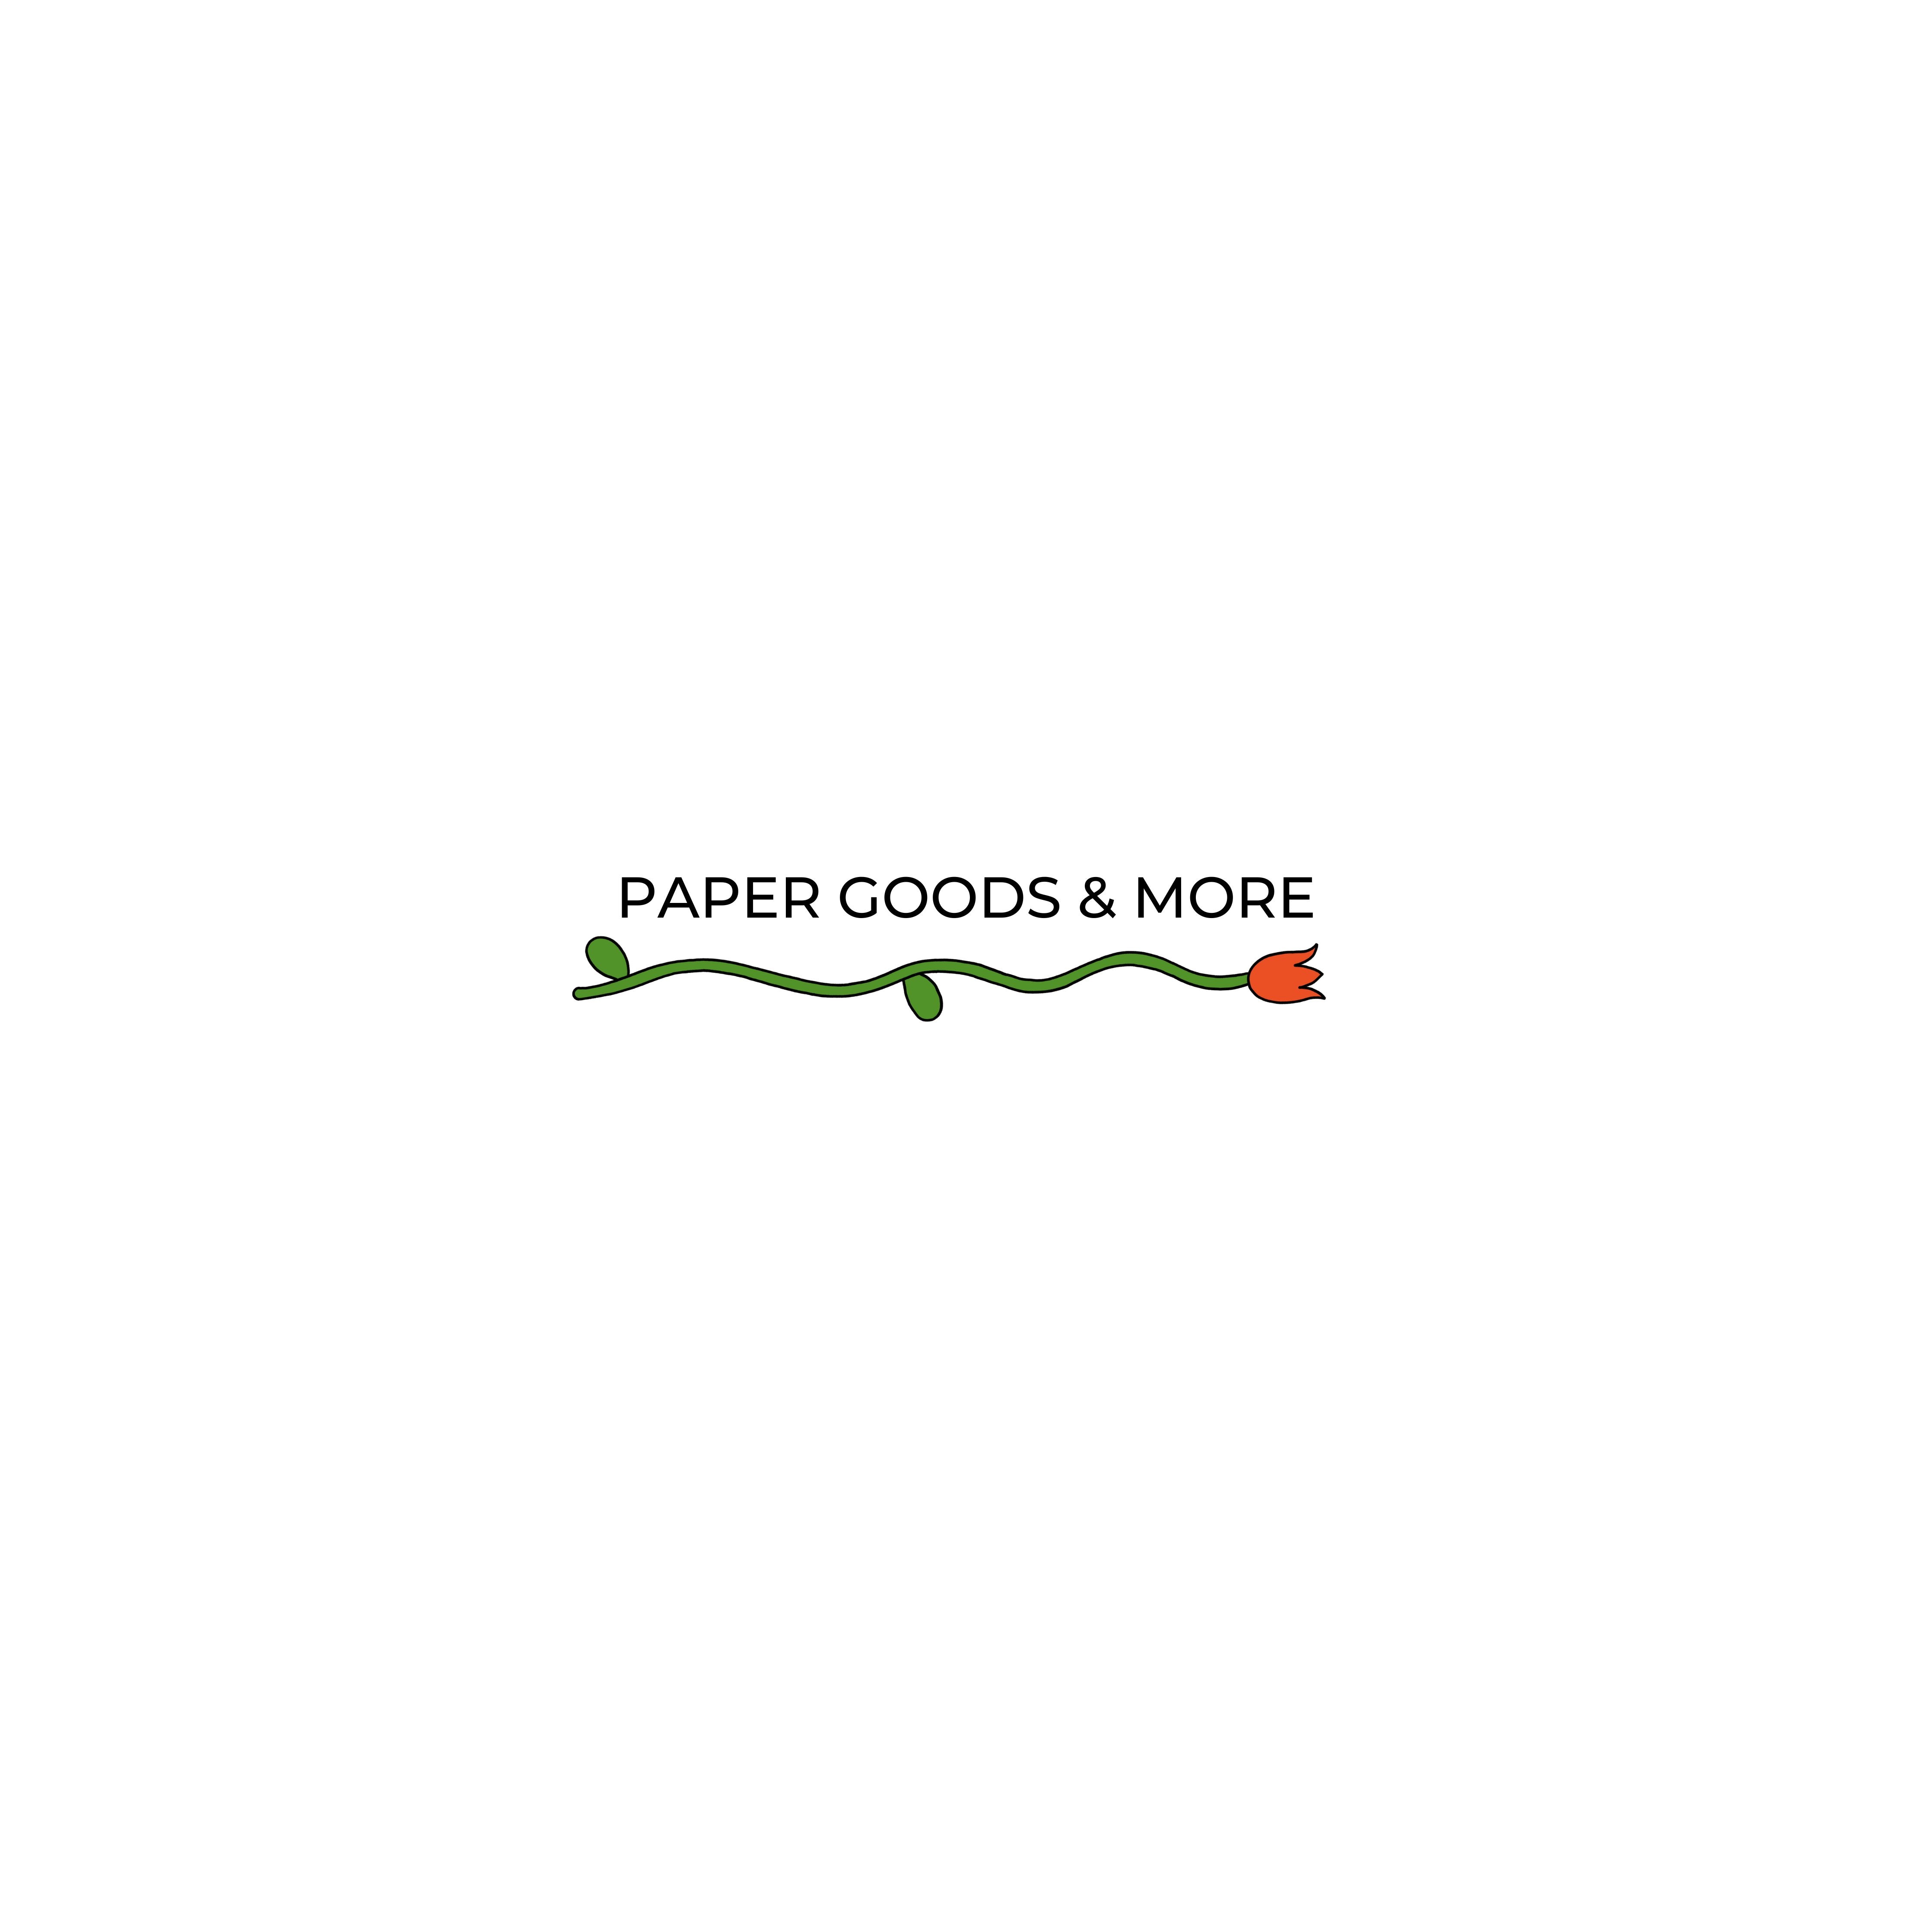 PAPER GOODS & MORE